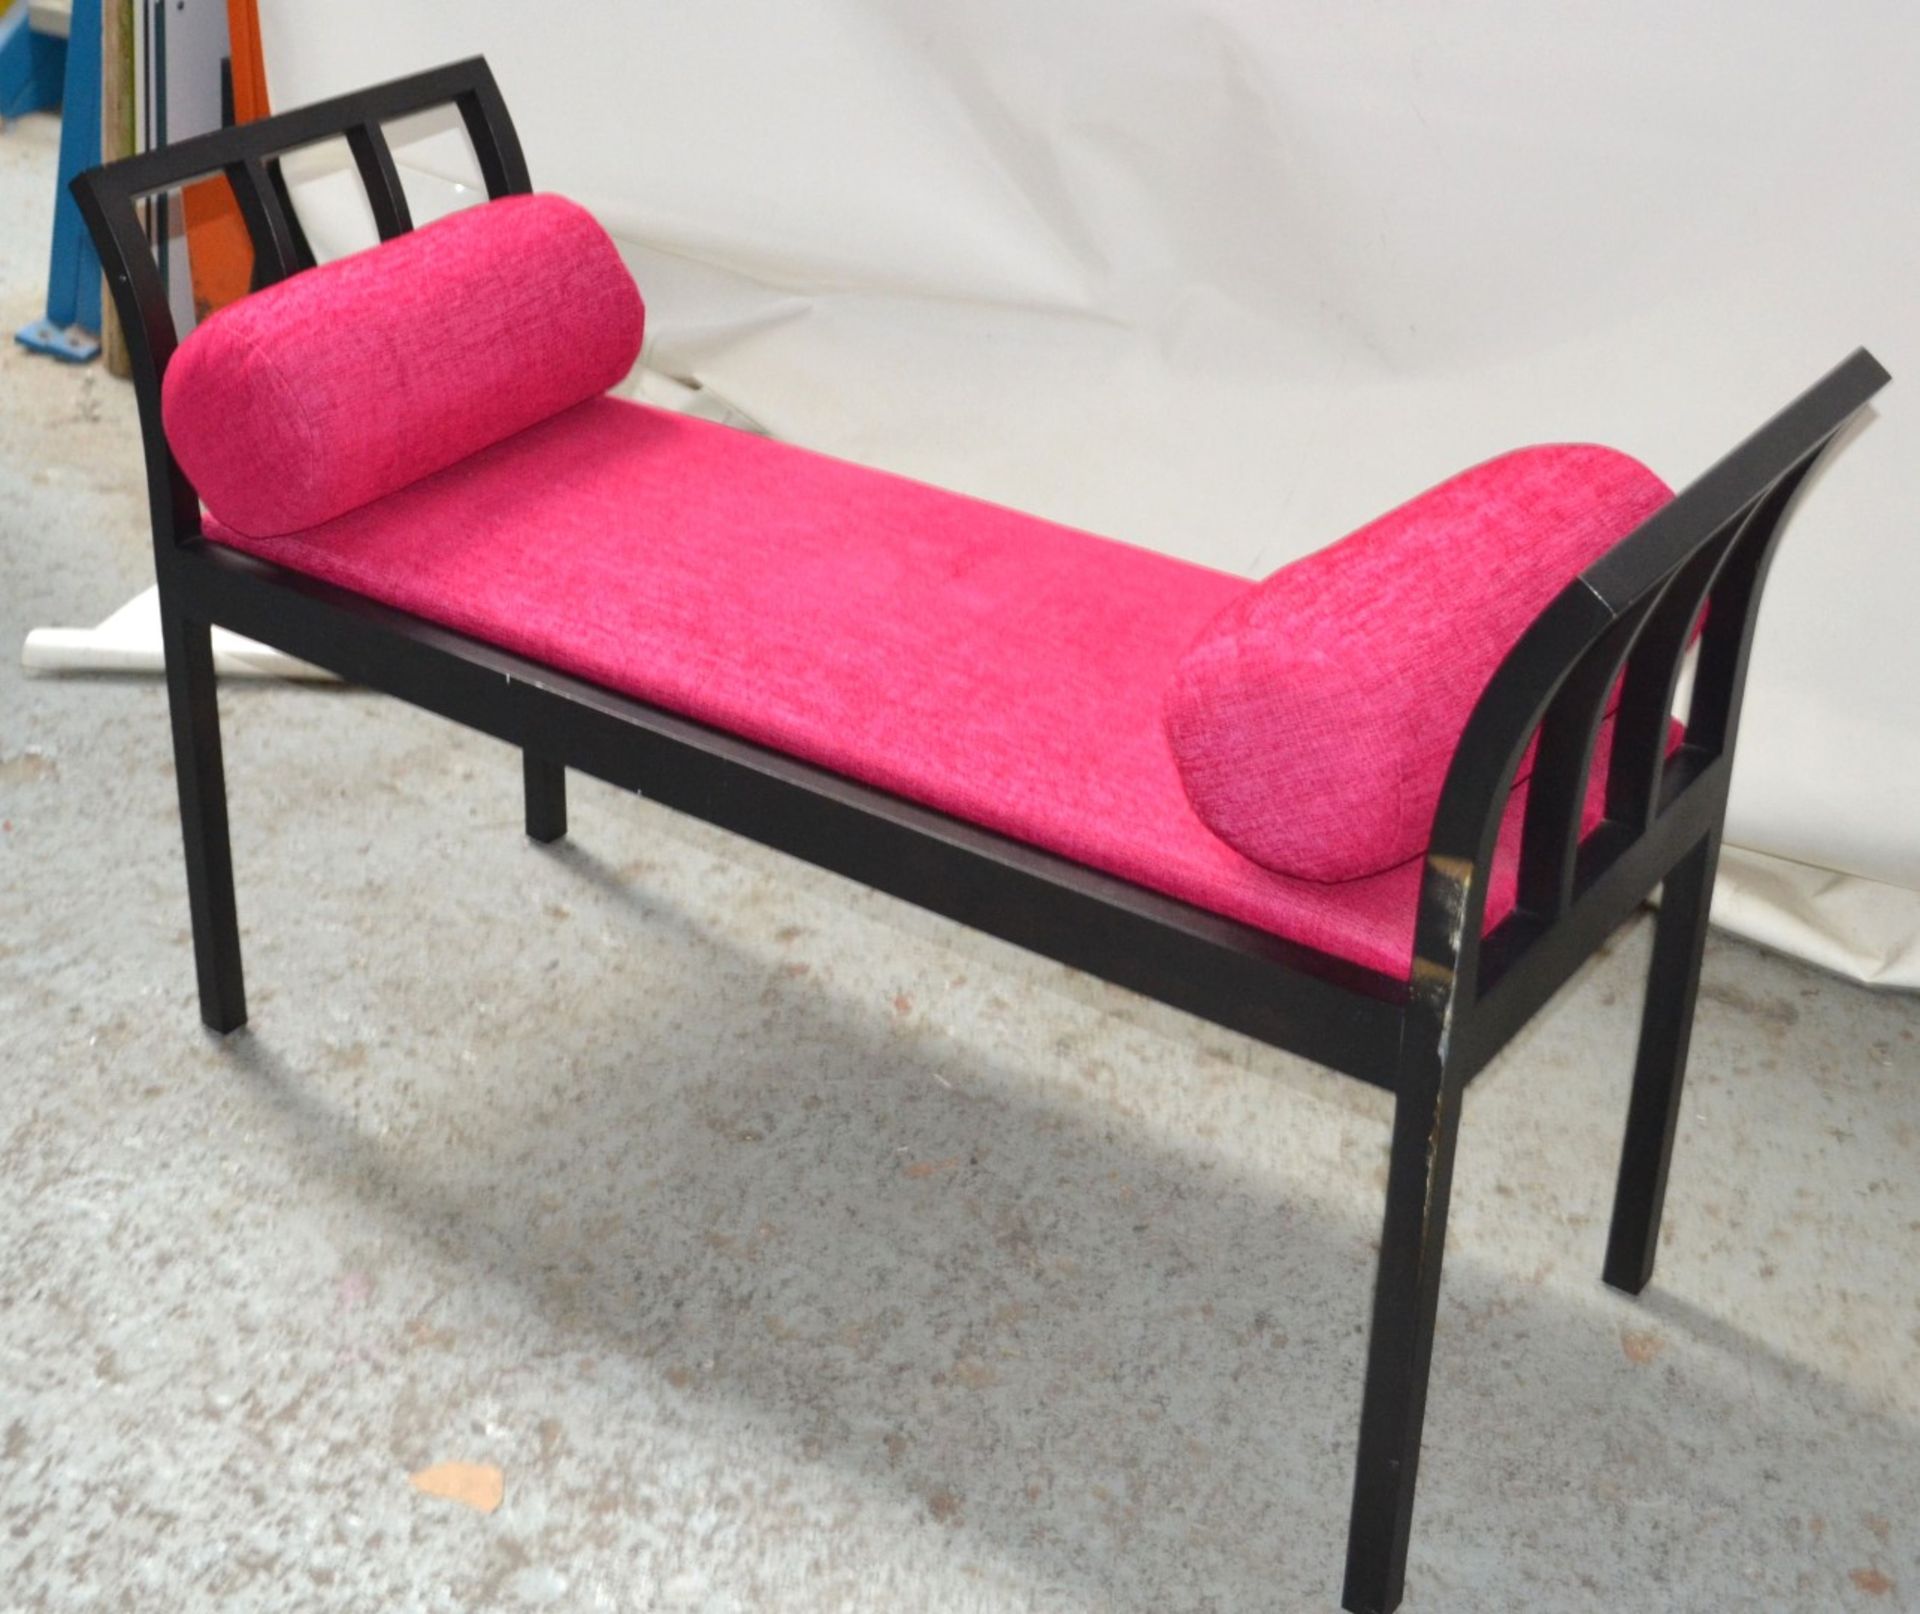 1 x Magenta Upholstered Bedroom Bench with 2 Cushions - CL314 - Location: Altrincham WA14 - *NO VAT - Image 10 of 11